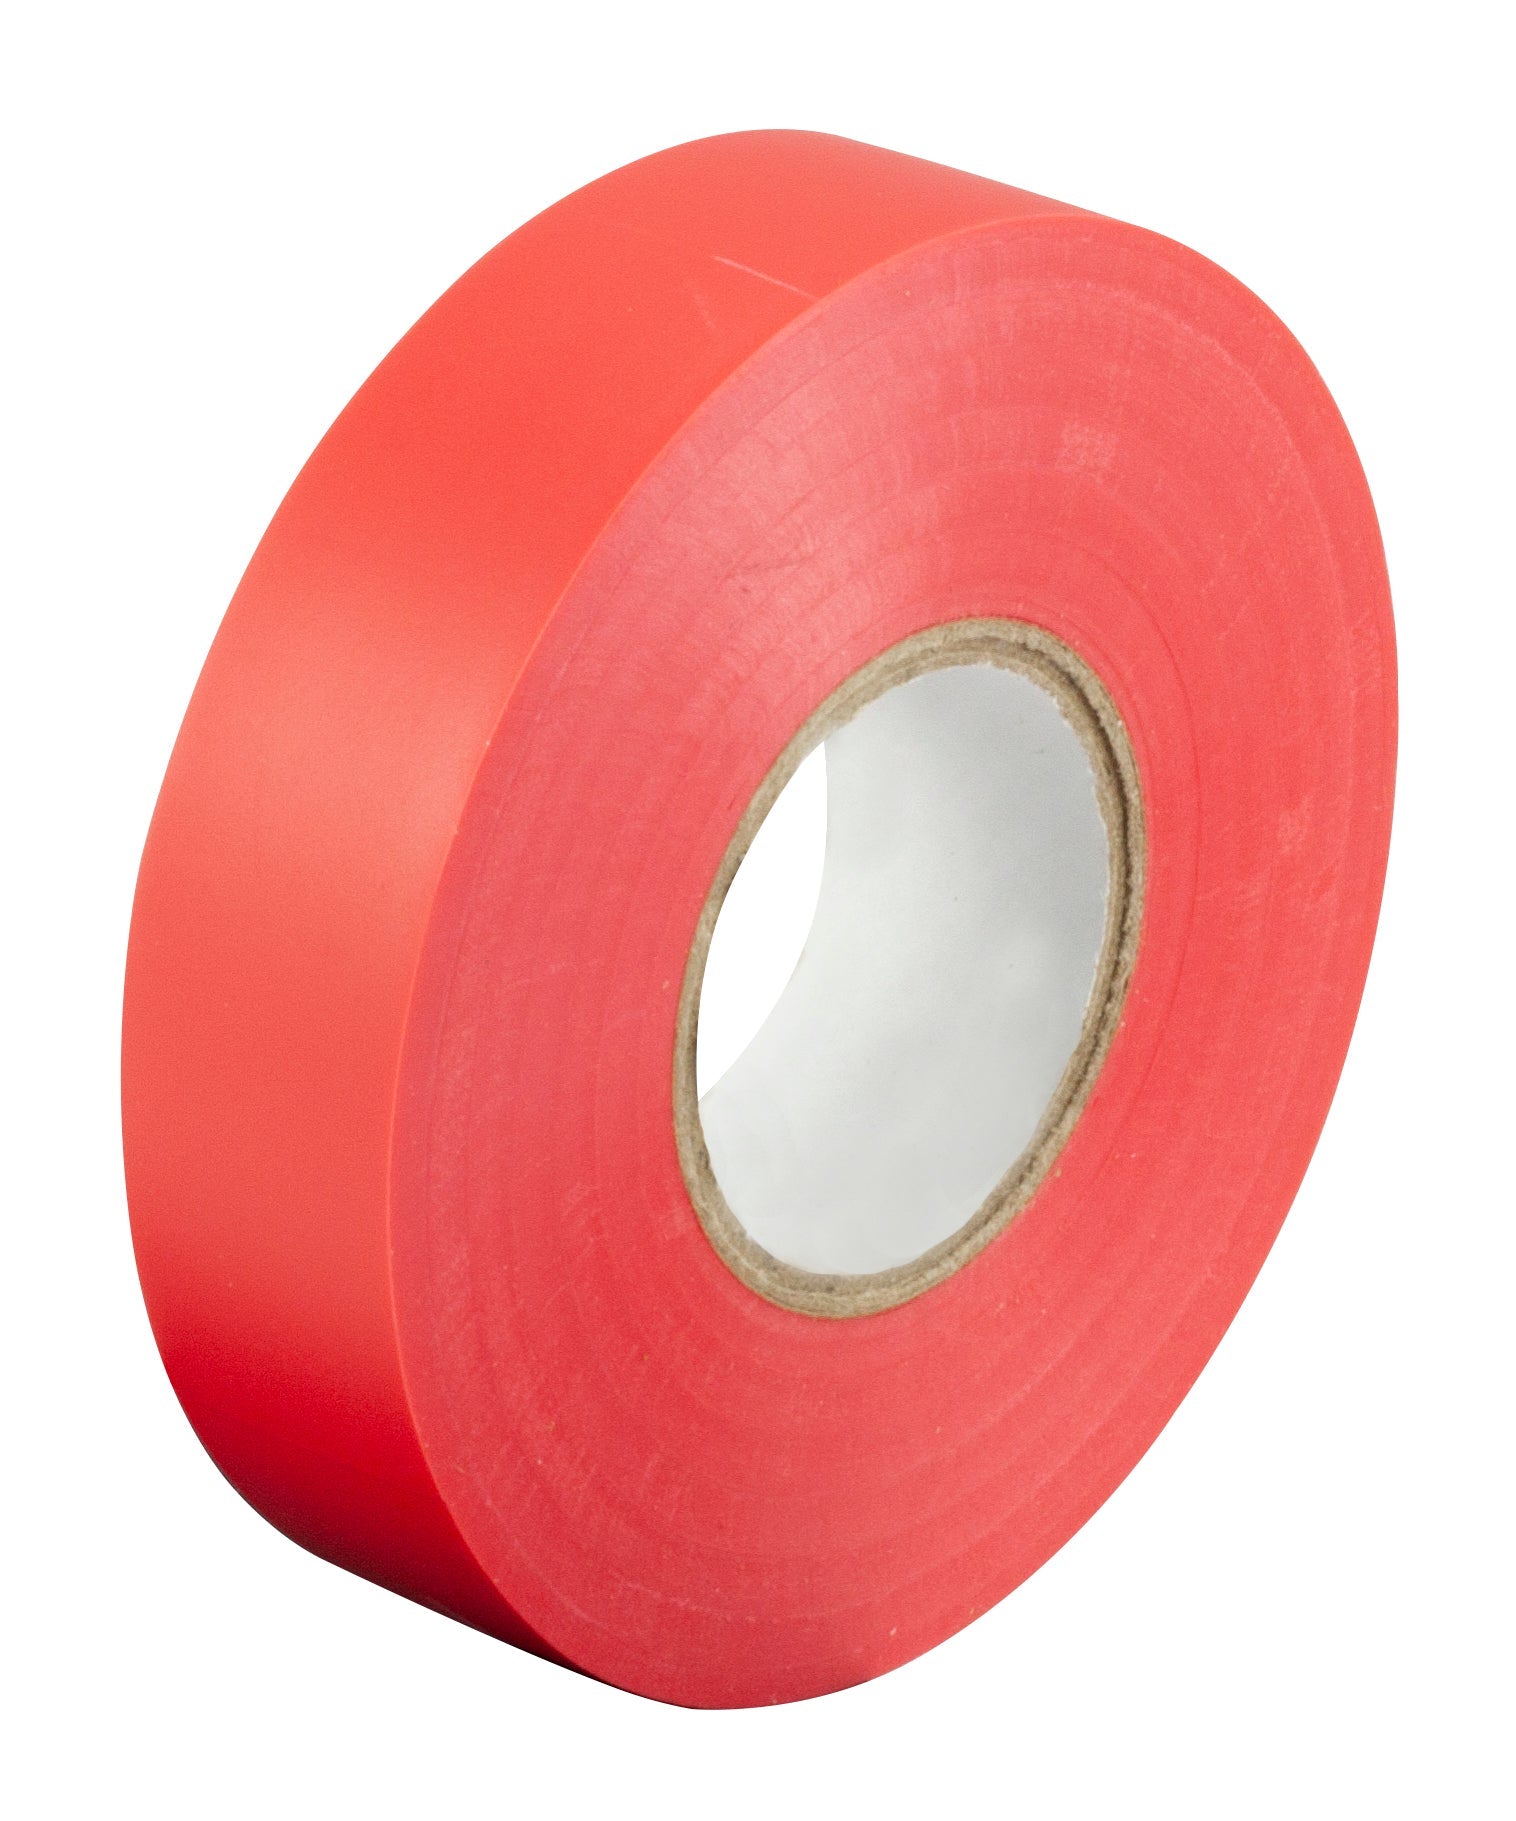 PVC Insulating Tape 19mm x 33m Roll - Red - Pack of 10